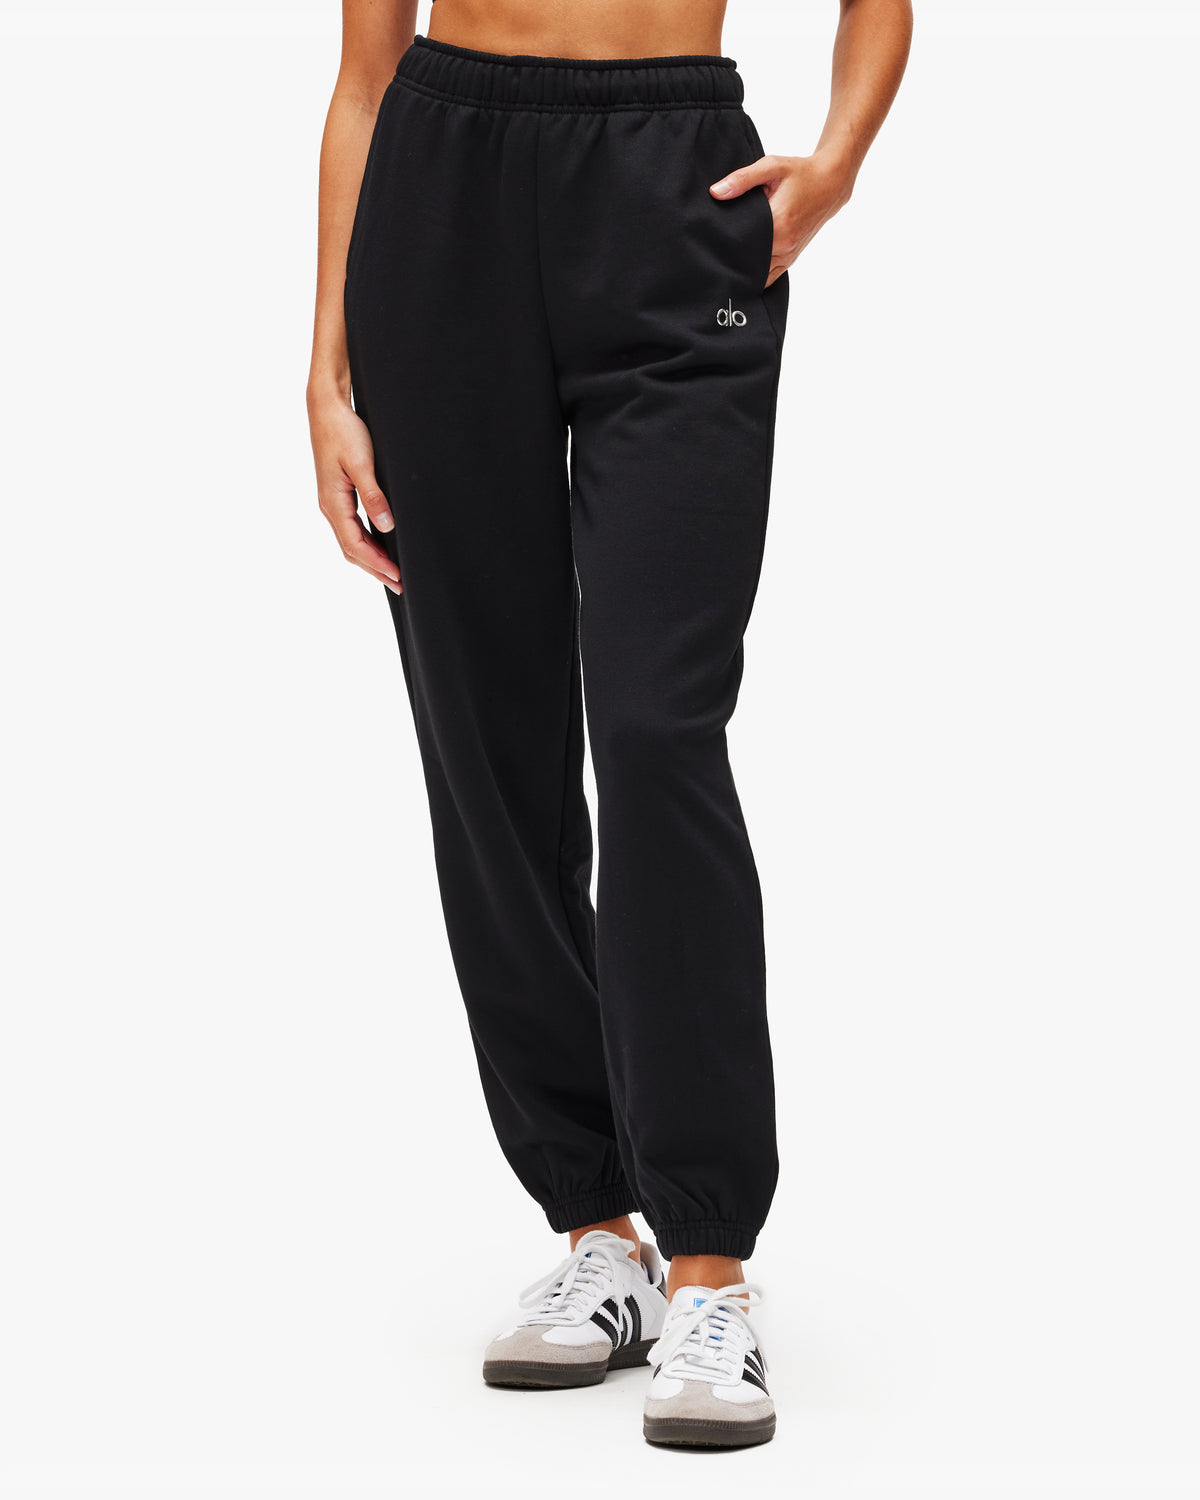 Alo Yoga Accolade Sweatpant Macadamia XS NWT Sold Out $118 - DIABETES SOUTH  AFRICA